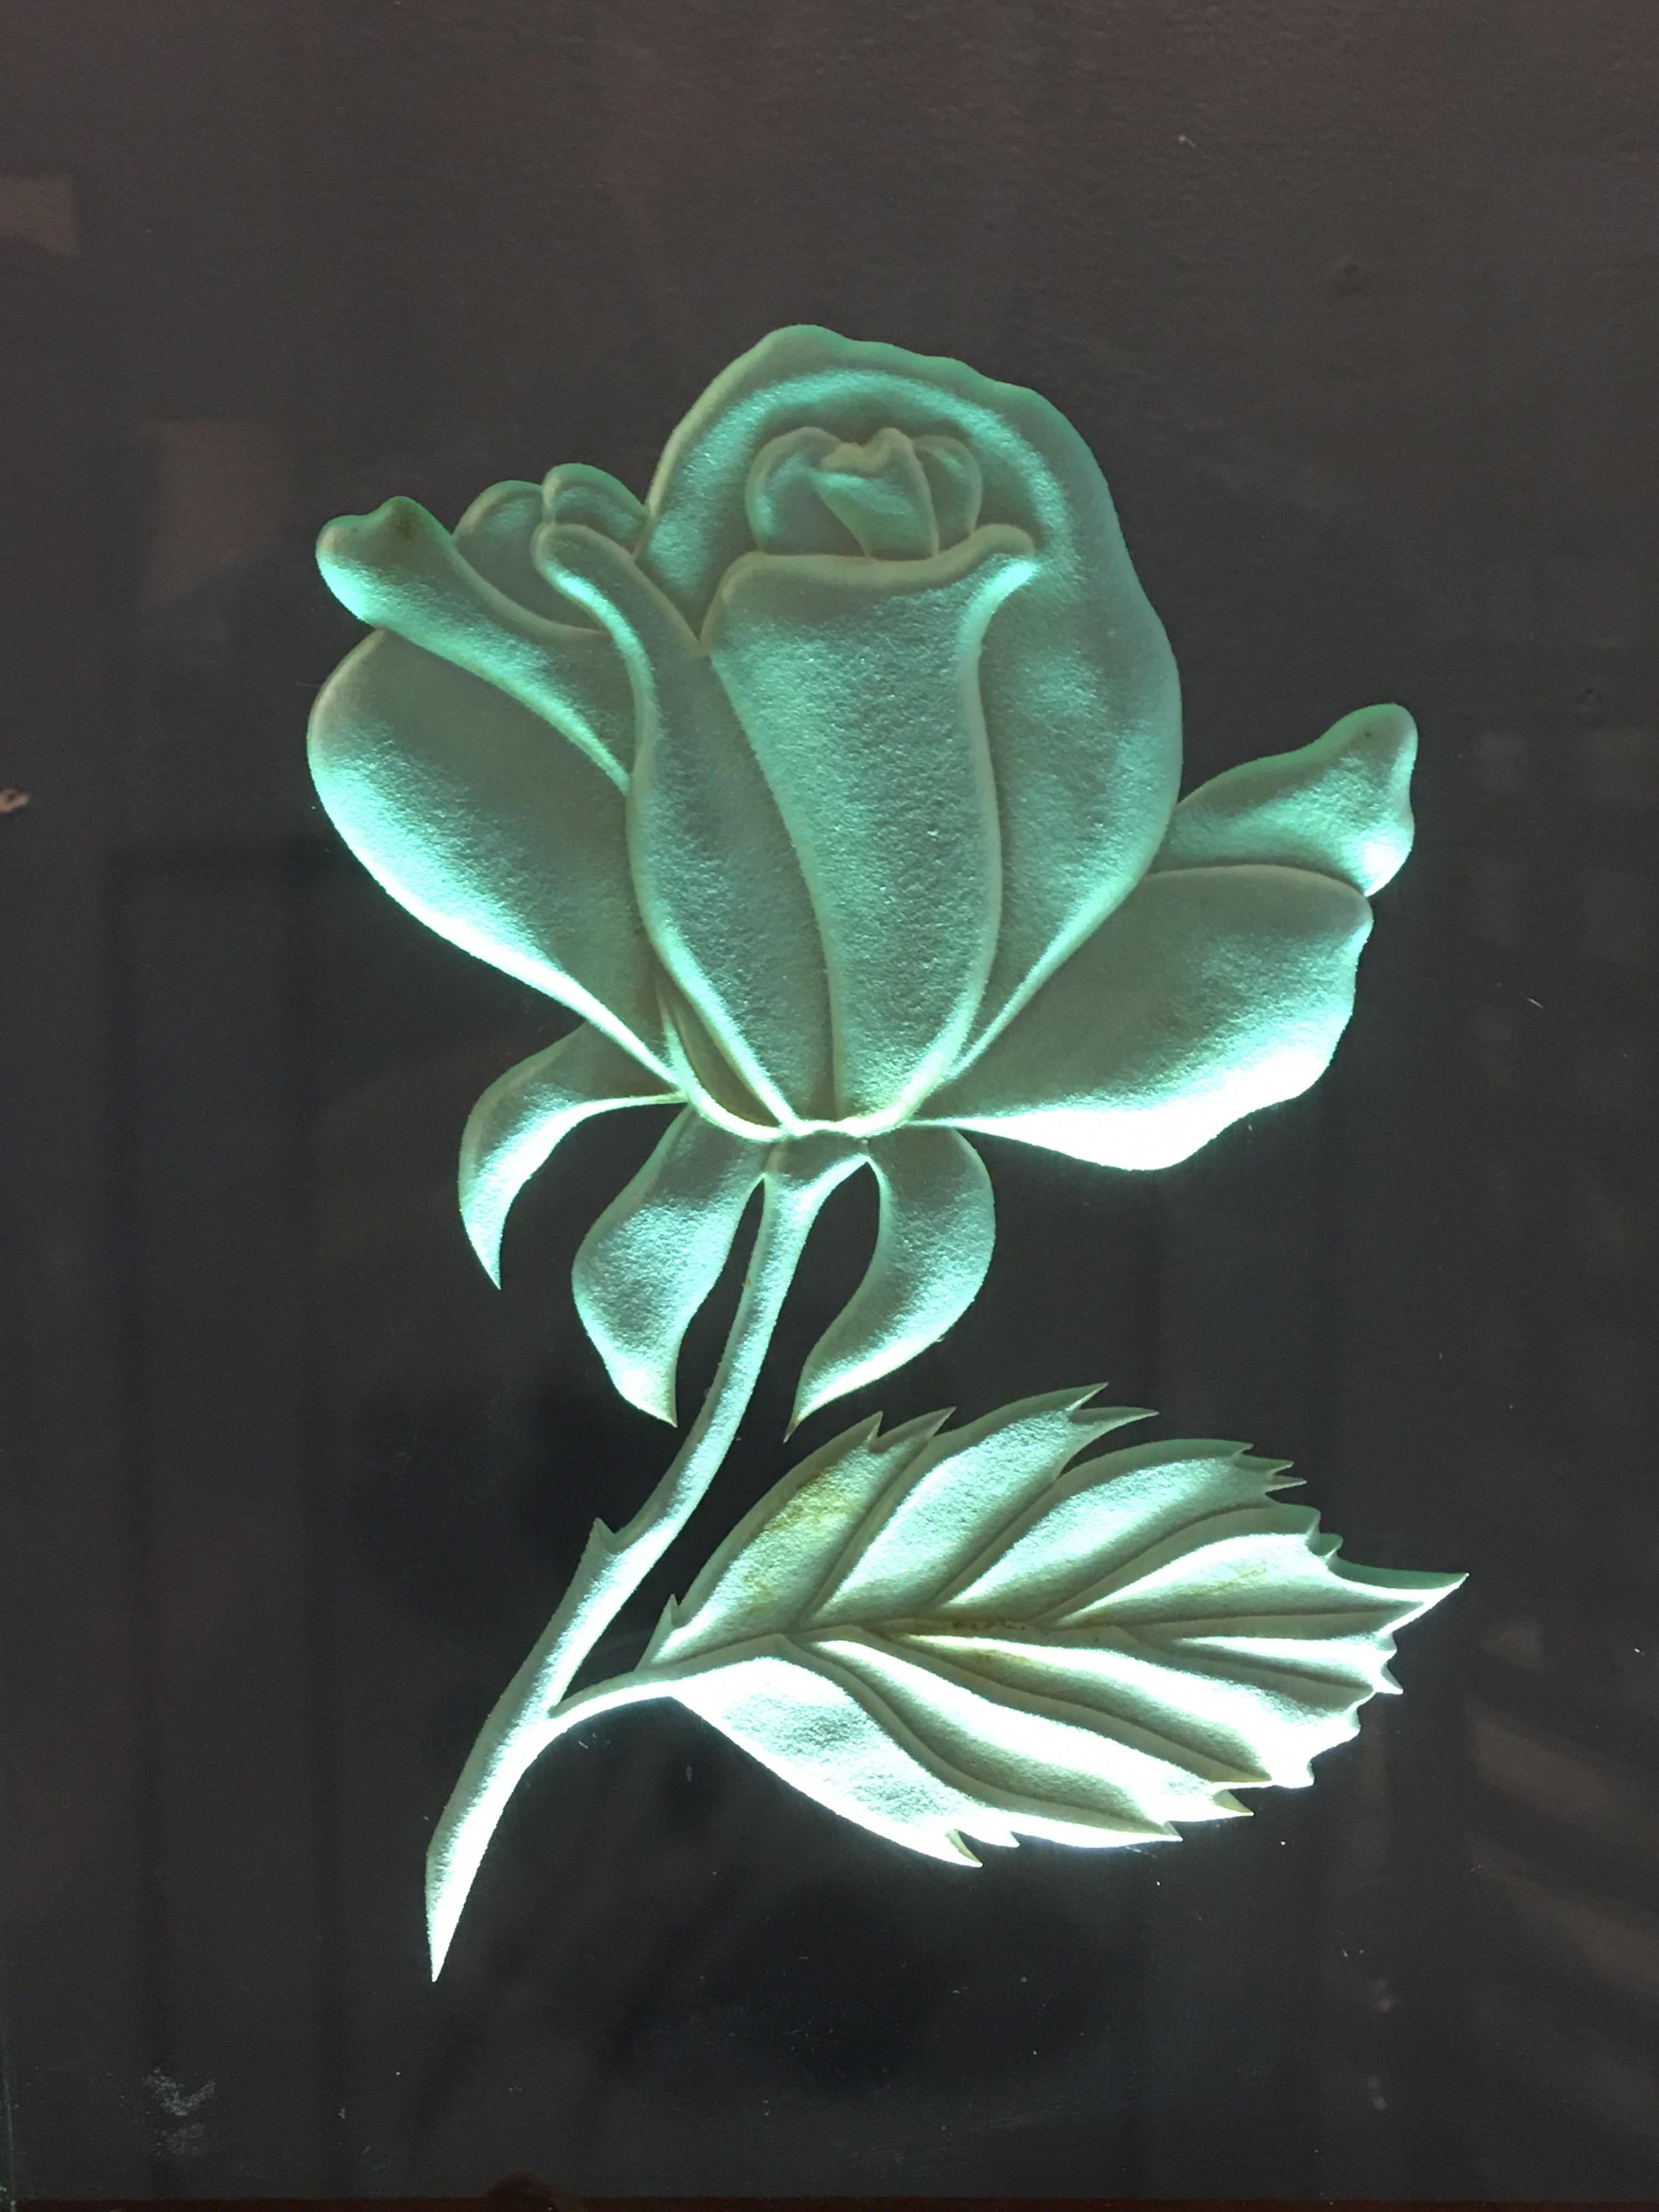 Possibly a sign from red rose coffee or tea? Have looked quite a bit but can not find an example of this light up Etched glass sign. Fluorescent light bulb in base lights up the glass. Glass has a greenish tint. Base is an early plastic shell over